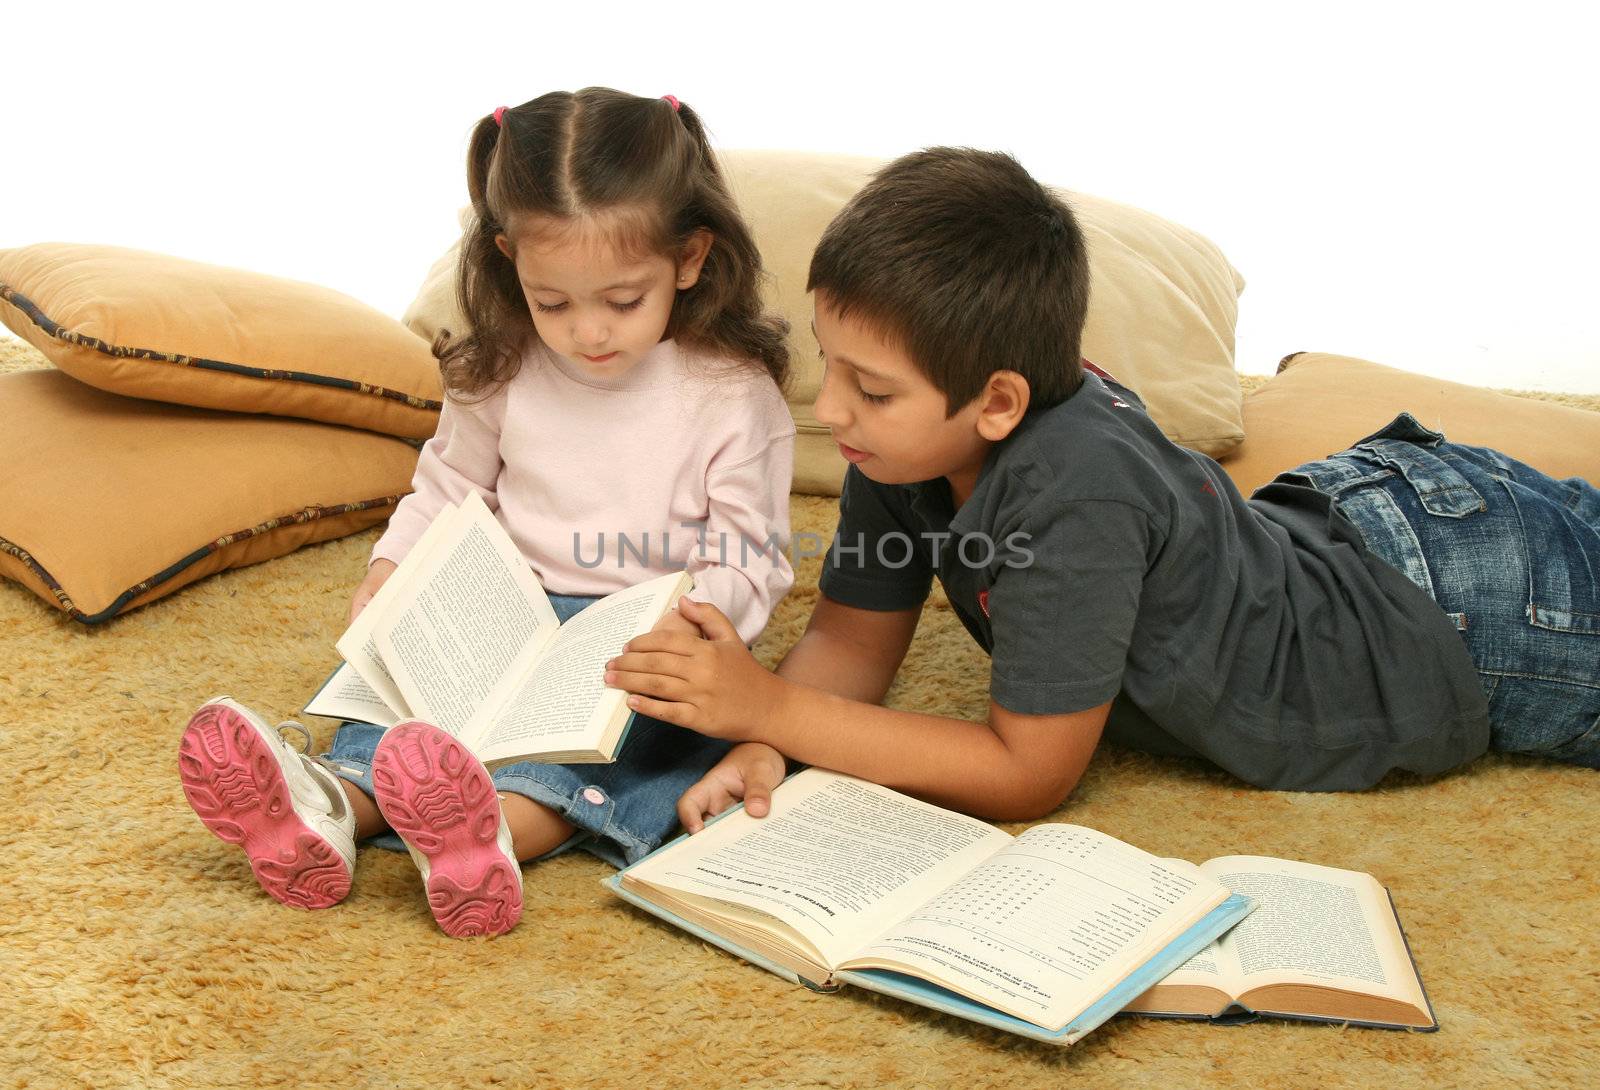 Brother and sister reading books over a carpet. They look interested and concentrated. 
